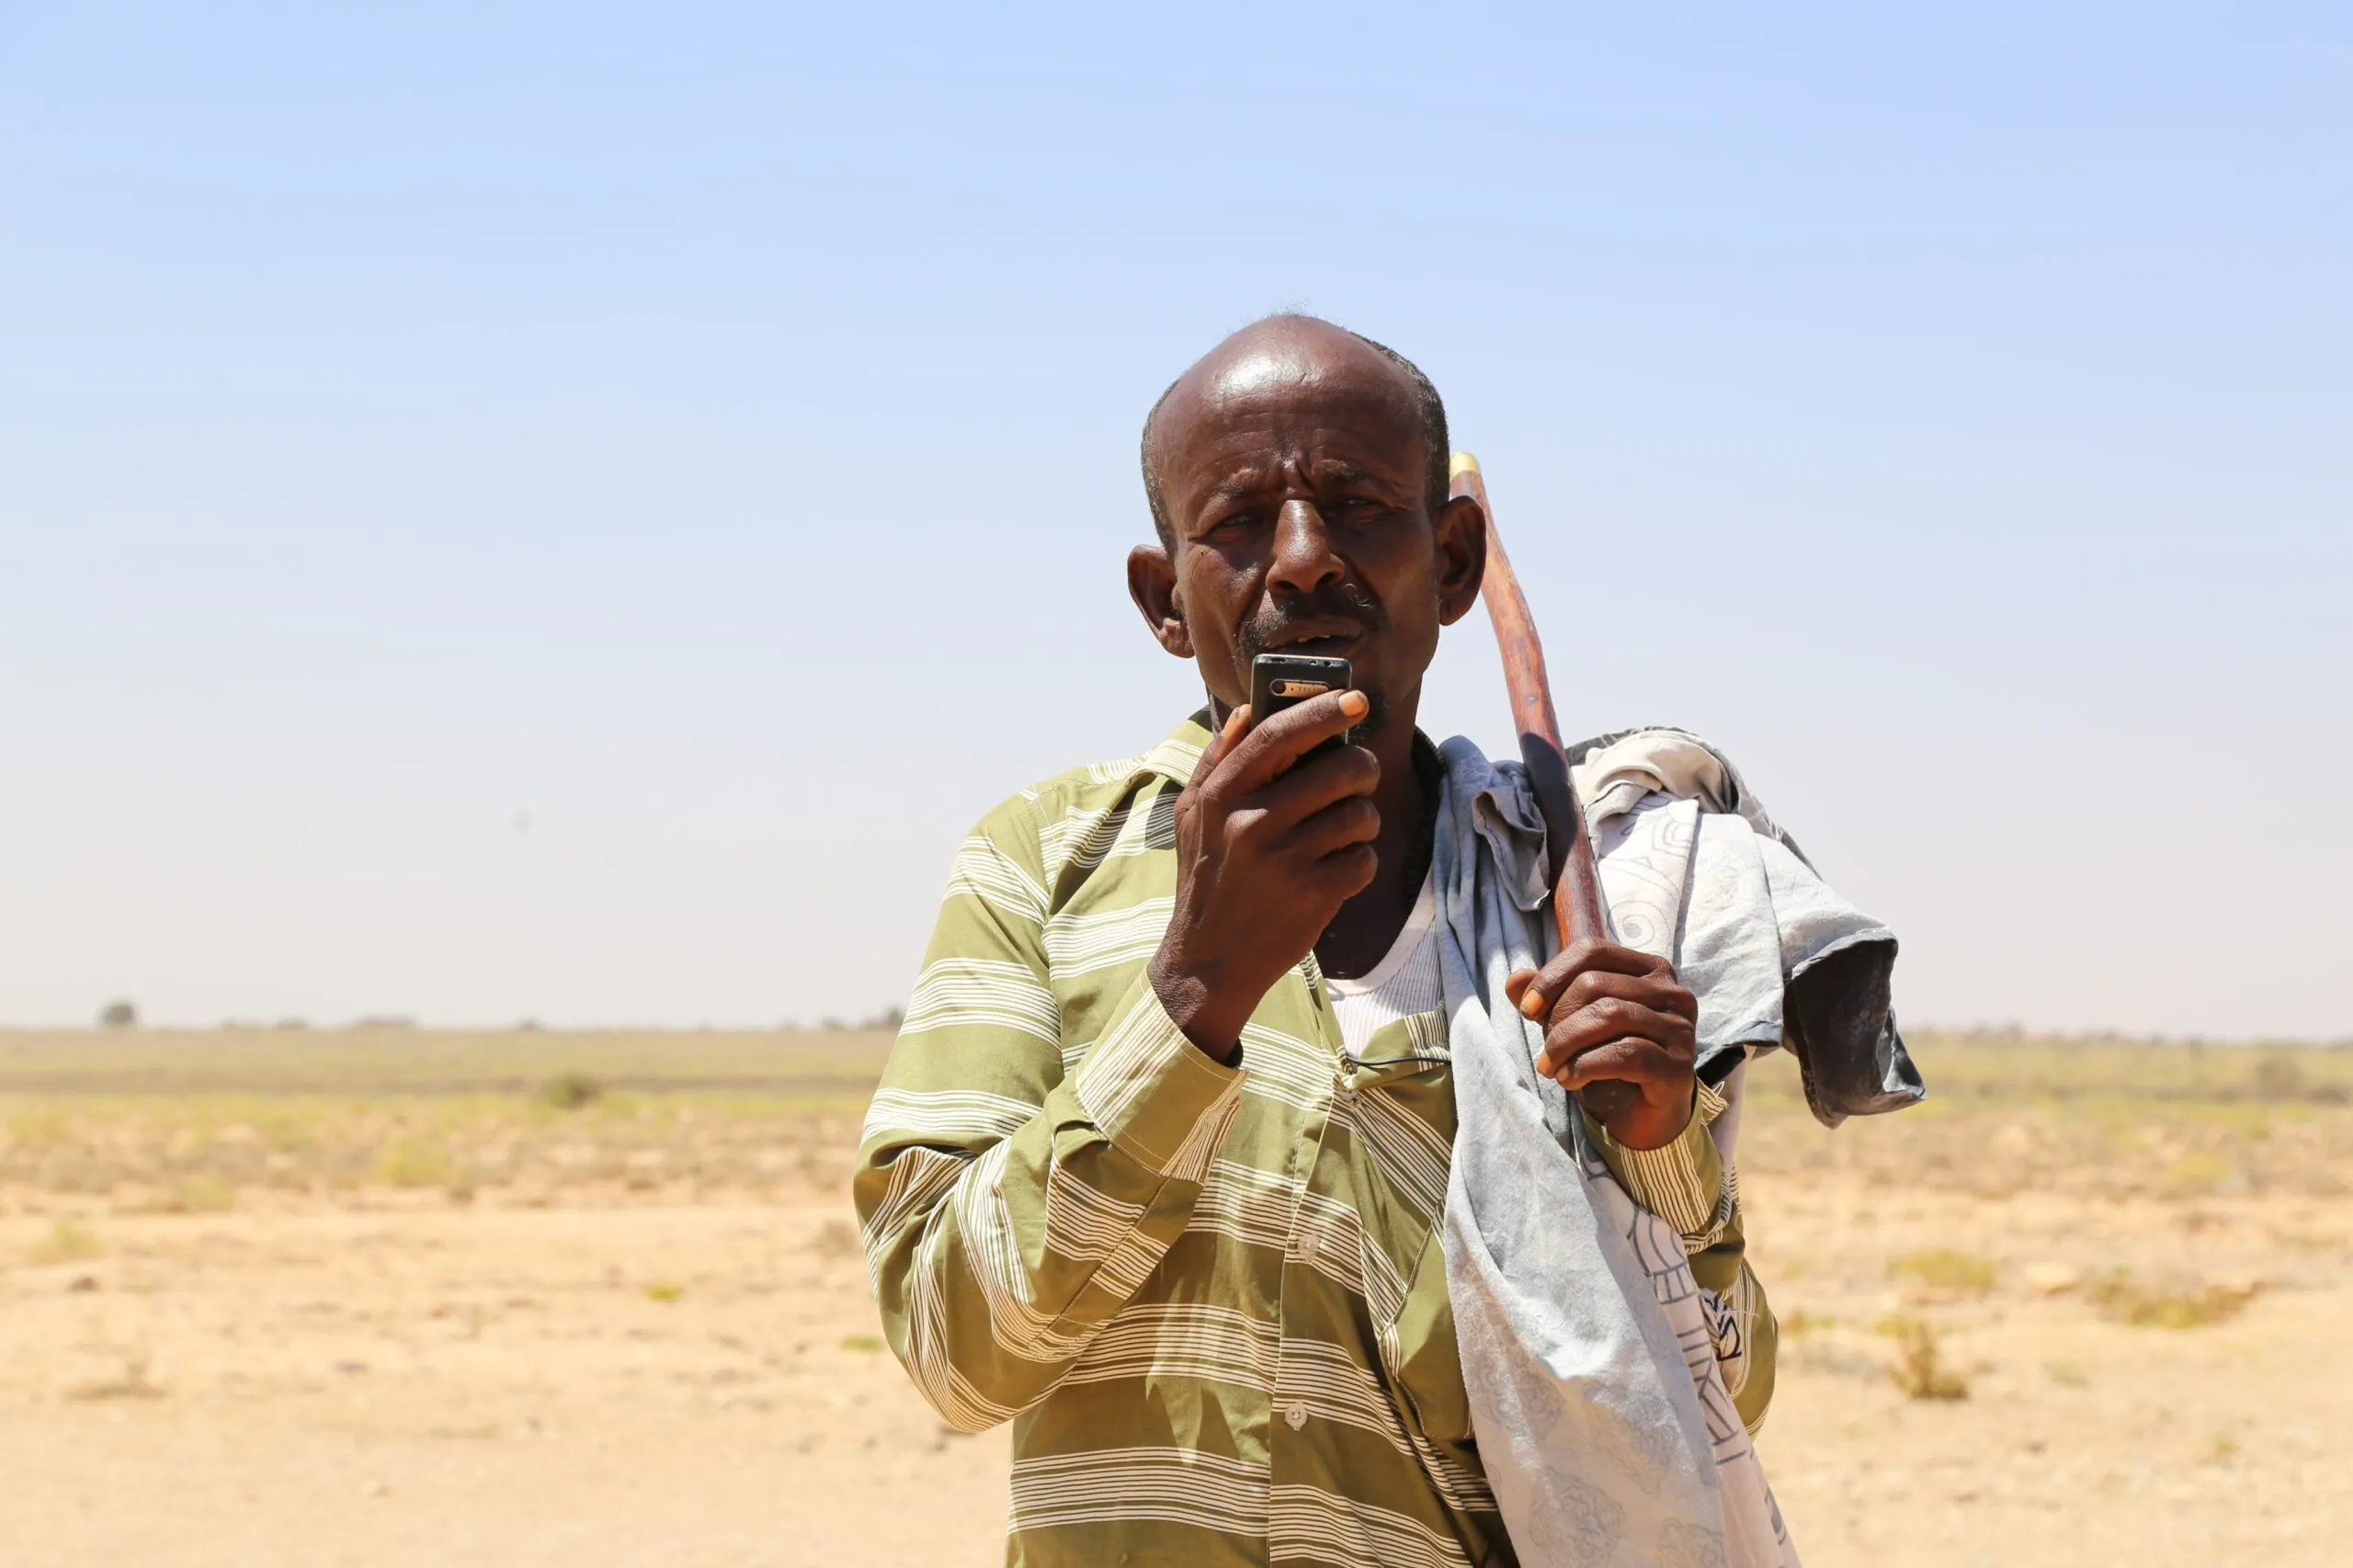 A Somalian man looking at the camera holding a mobile phone in his right hand.